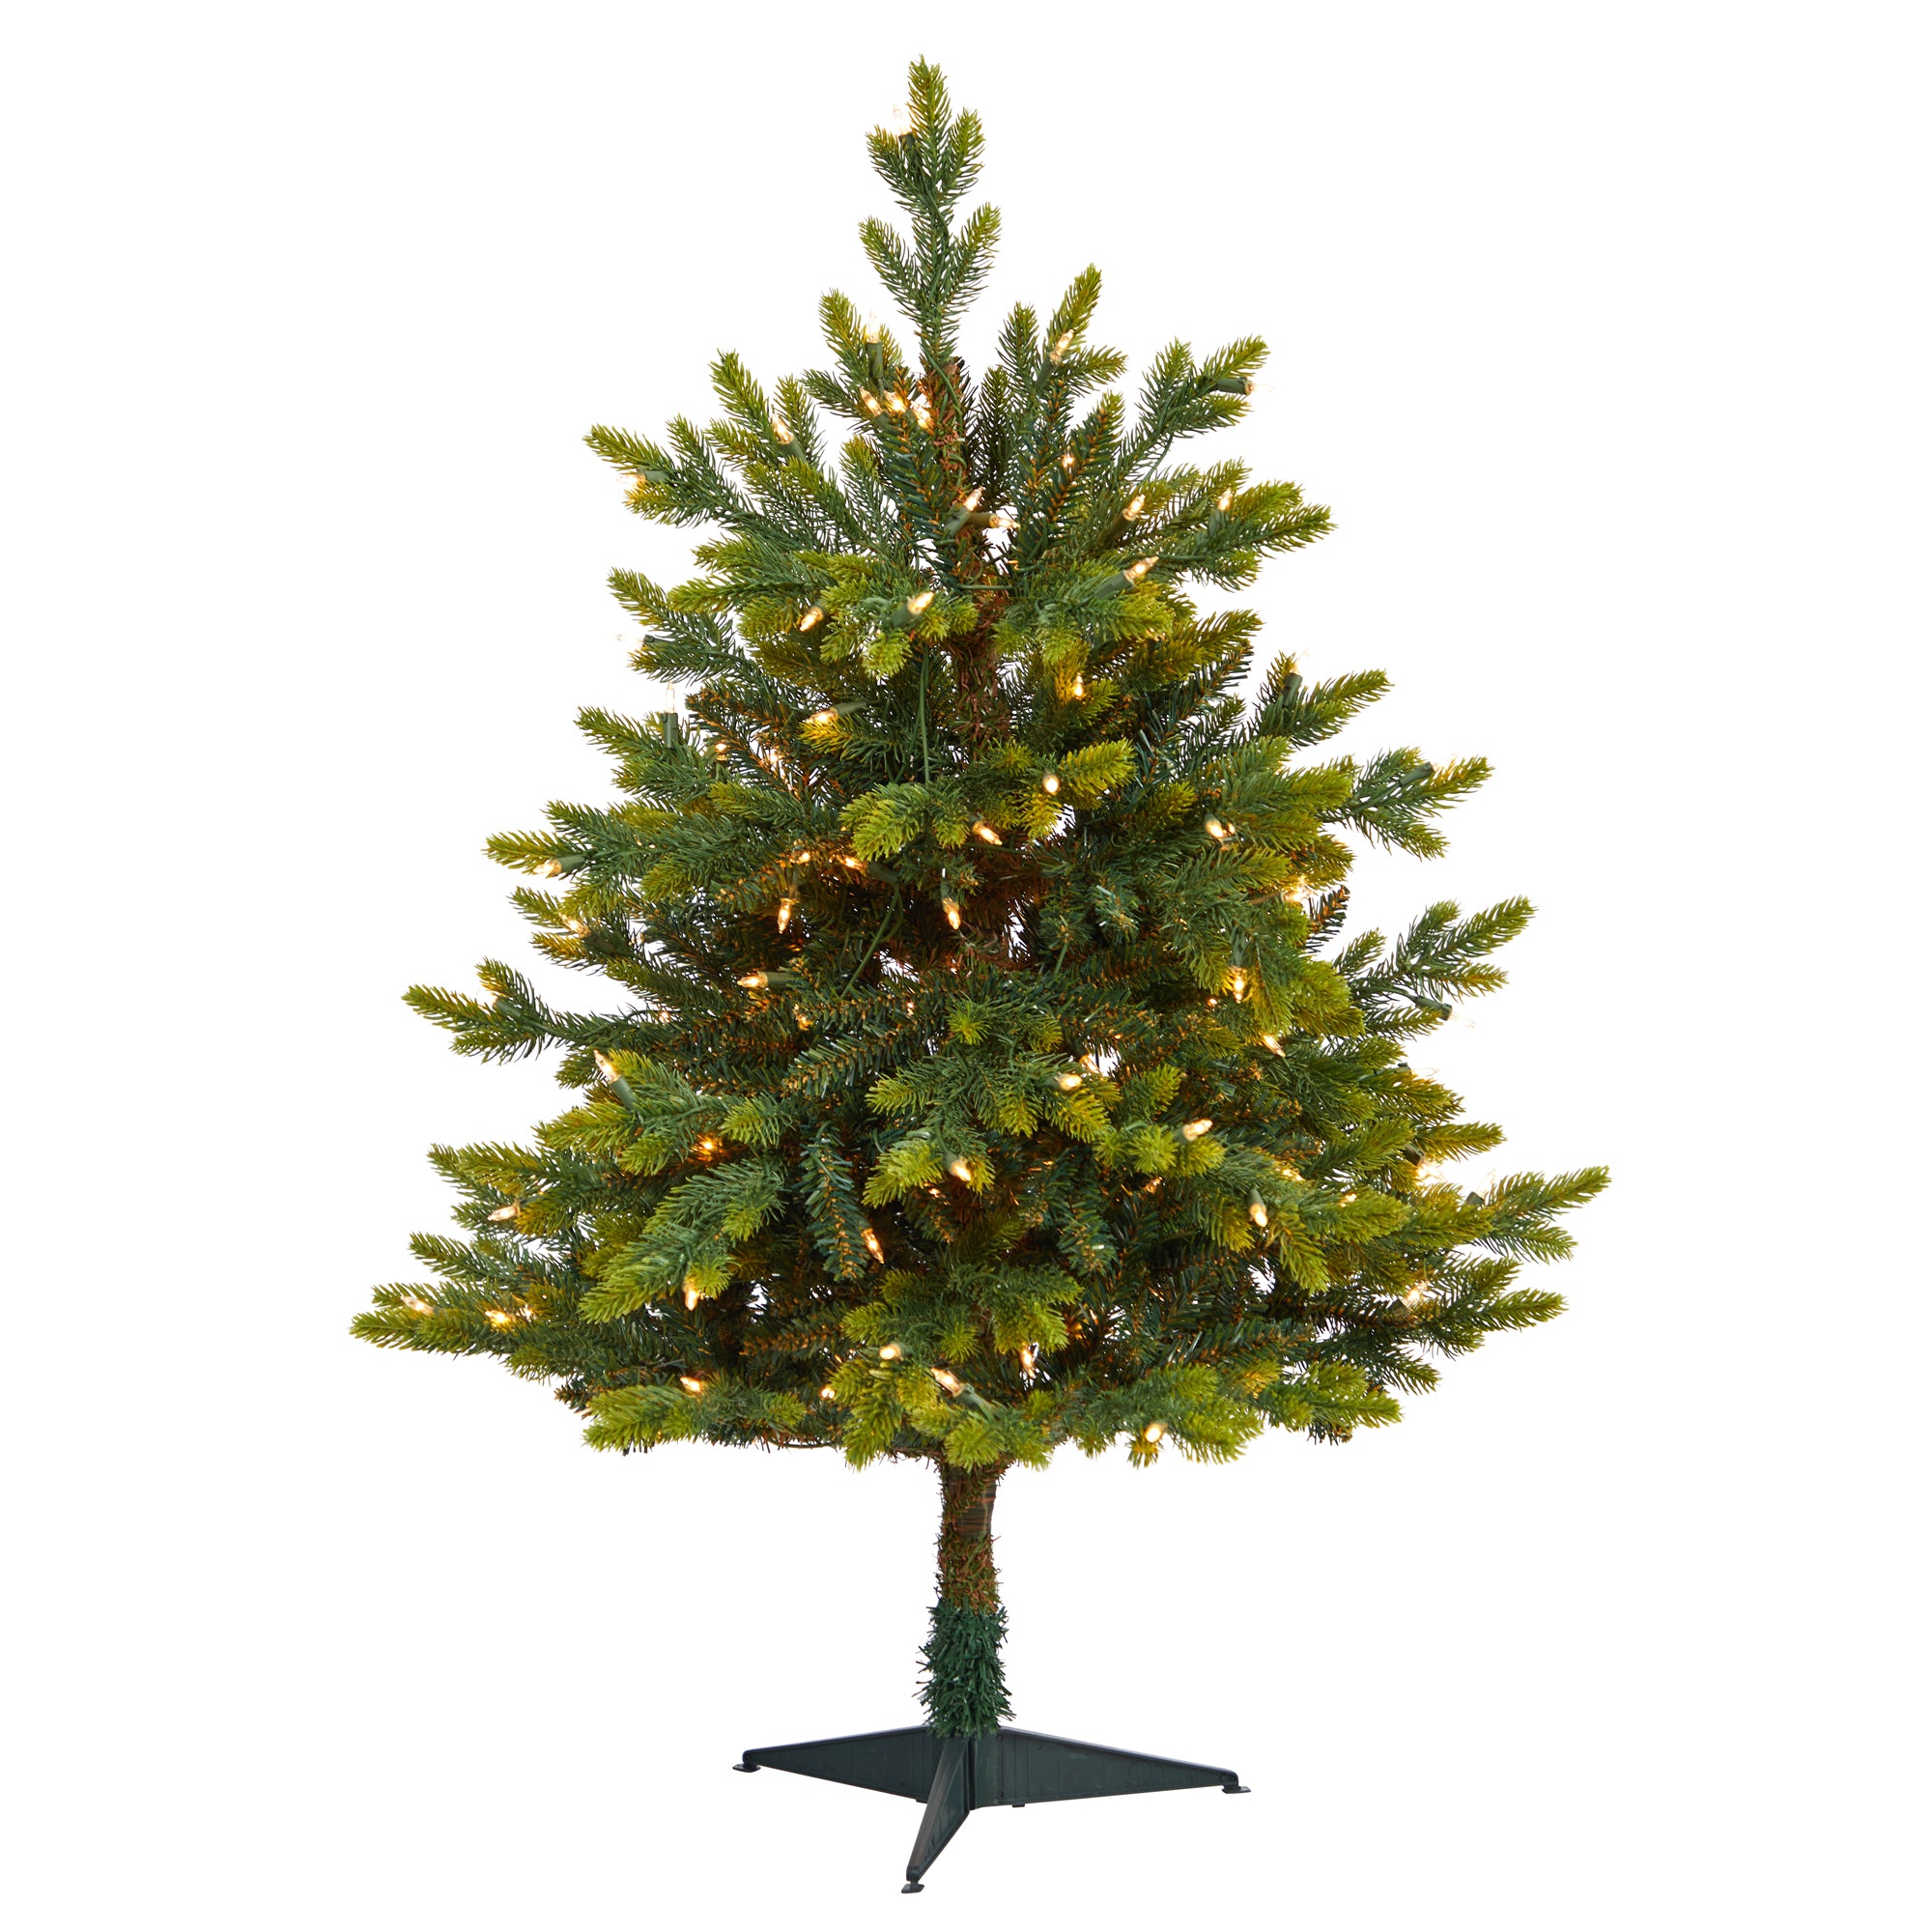 3' North Carolina Fir Artificial Christmas Tree with 150 Clear Lights and 563 Bendable Branches